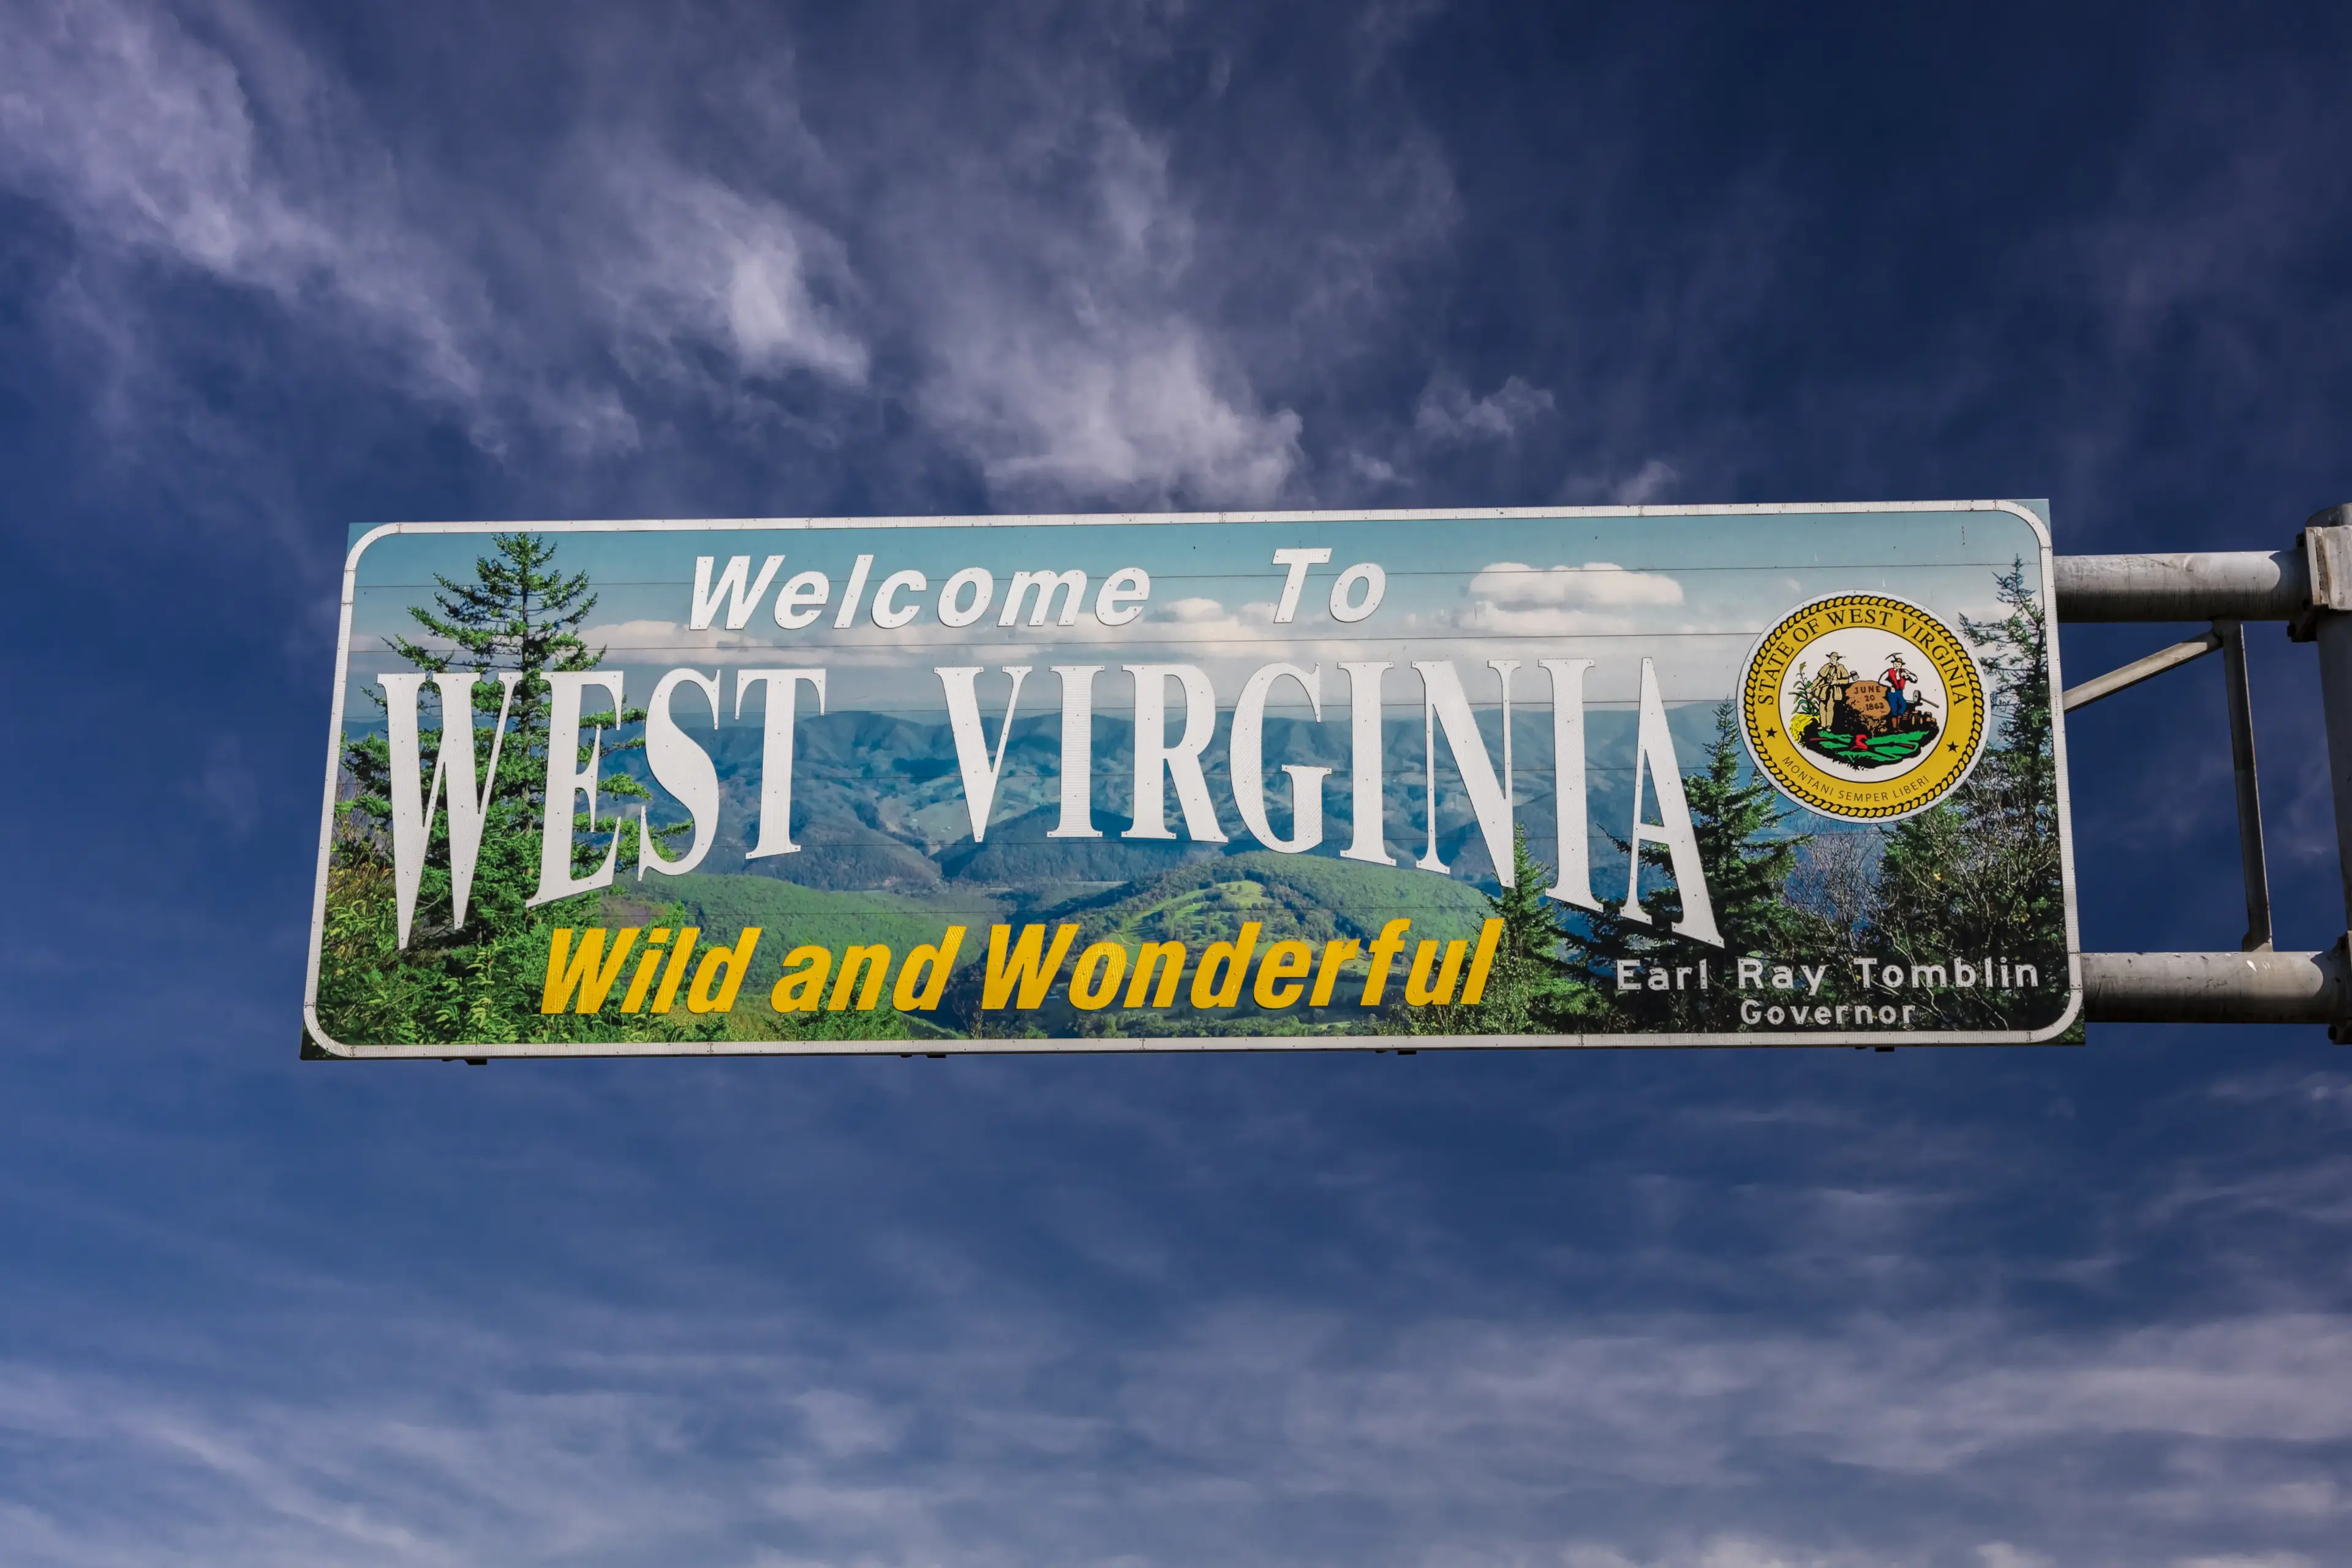 What to do in West Virginia